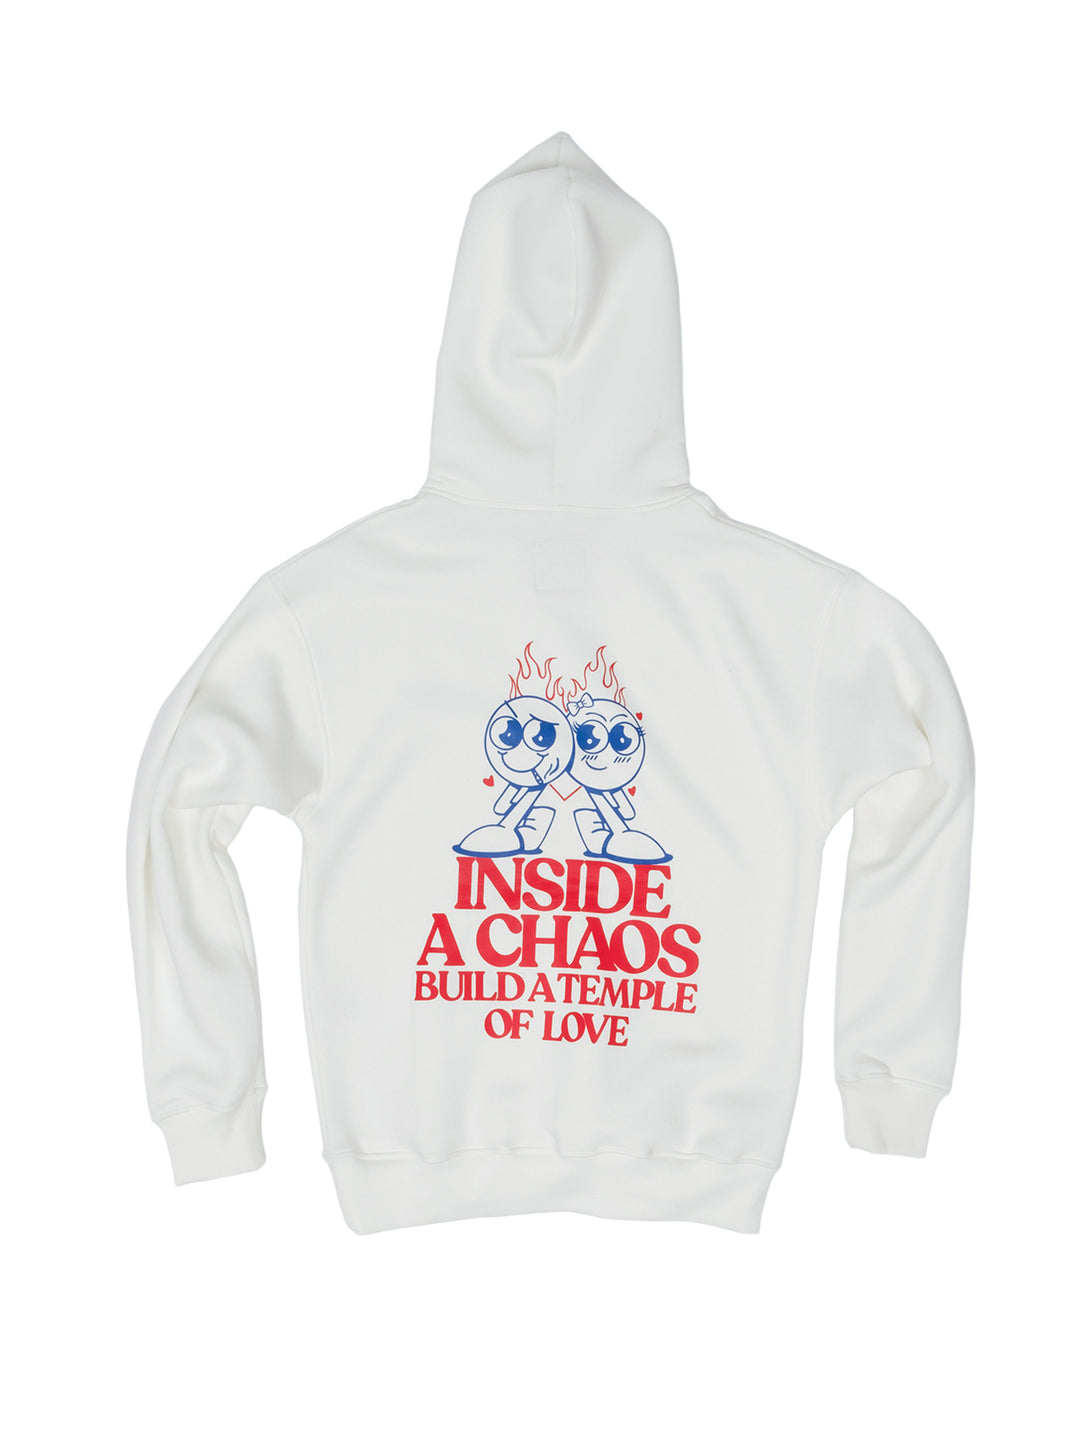 Inside A Chaos, Build A Temple Of Love / Oversized Pullover Hoodie